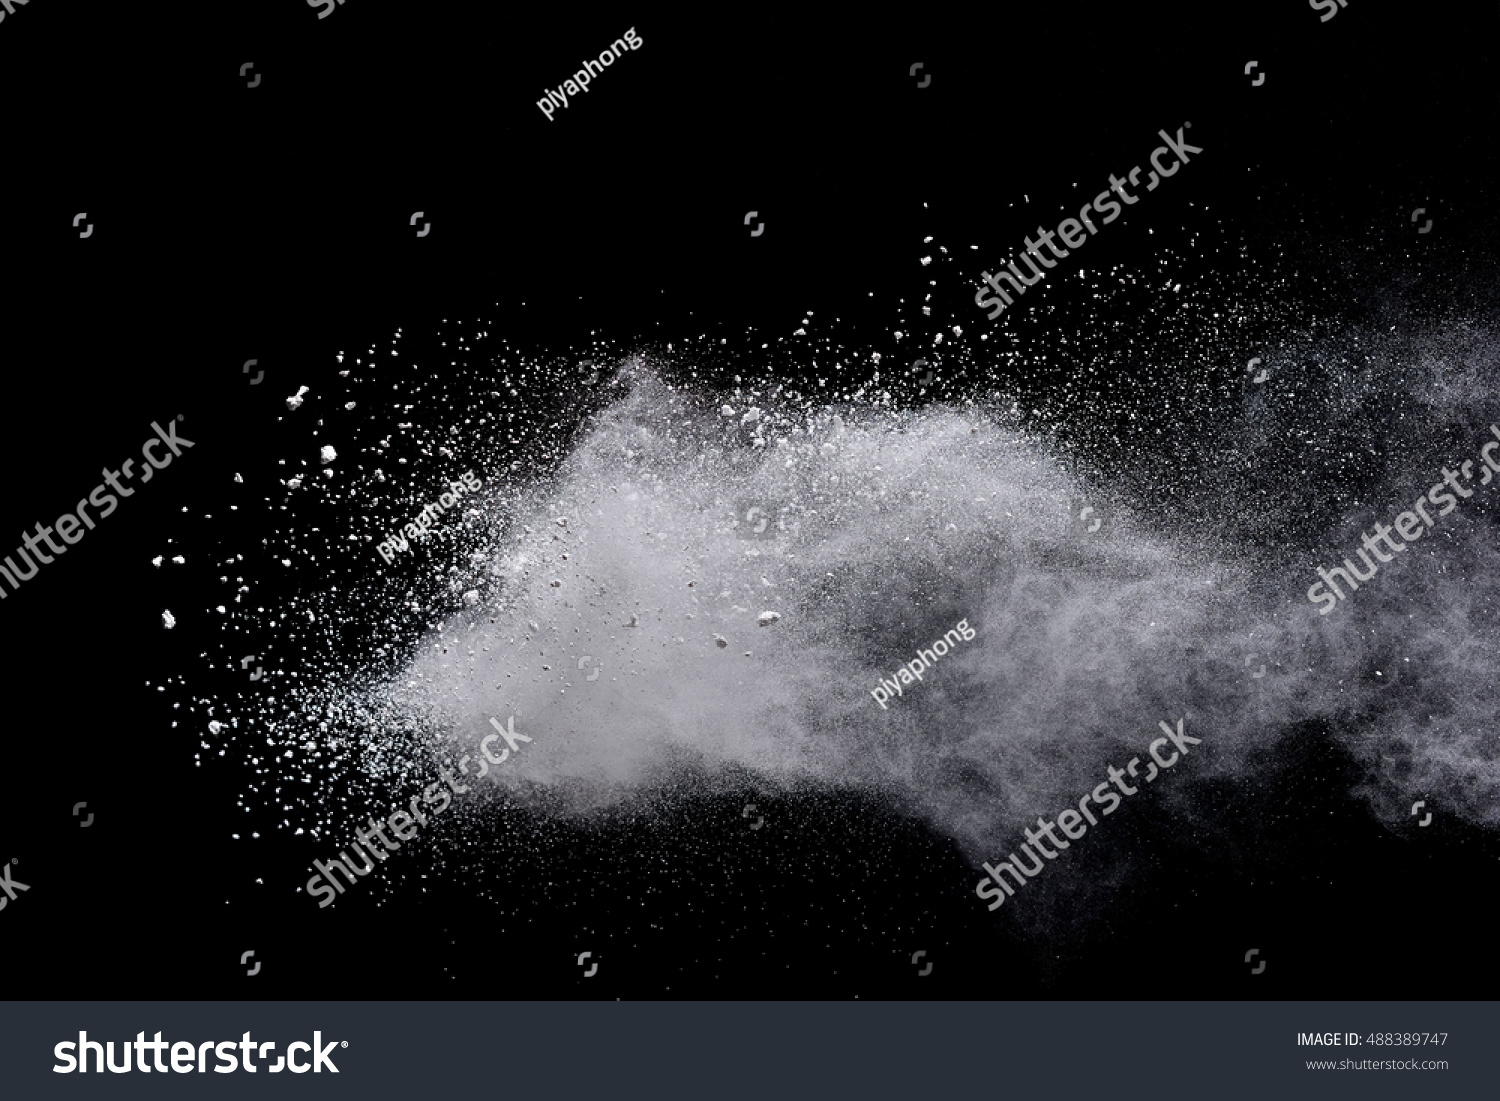 White powder/particles fly after being exploded against black background #488389747